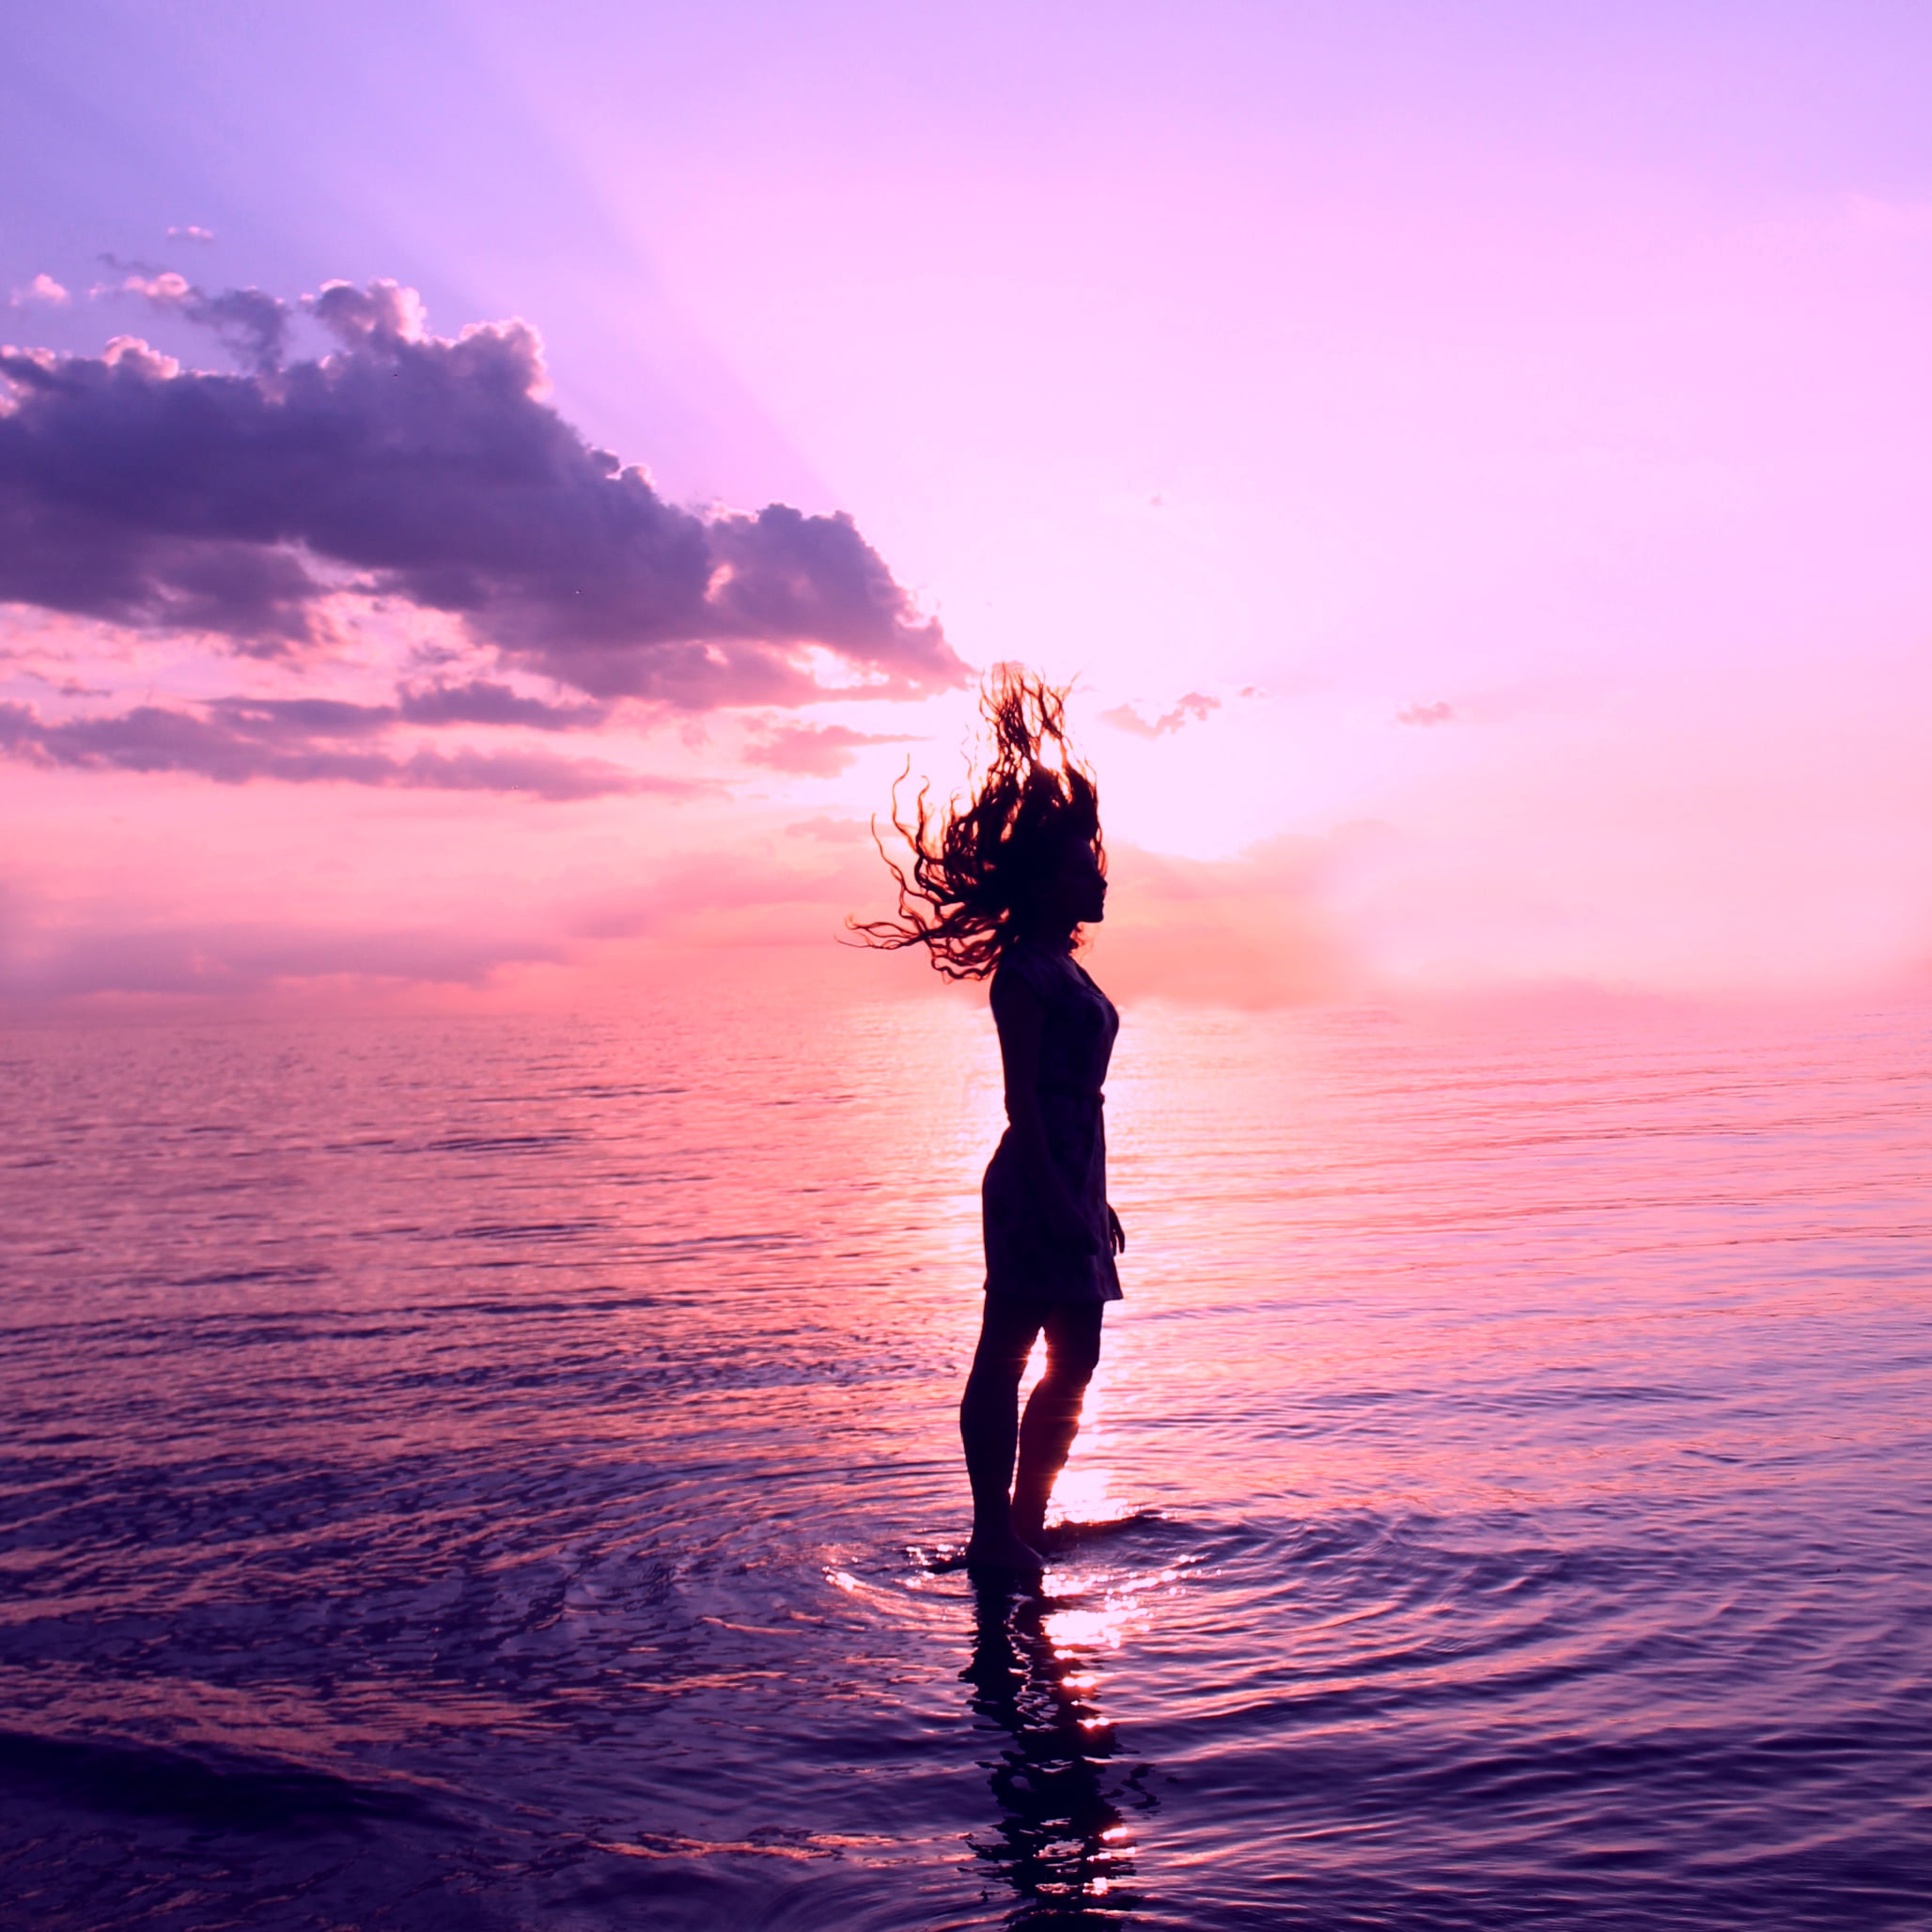 silhouette photo of a woman standing on a body of water, self-portrait